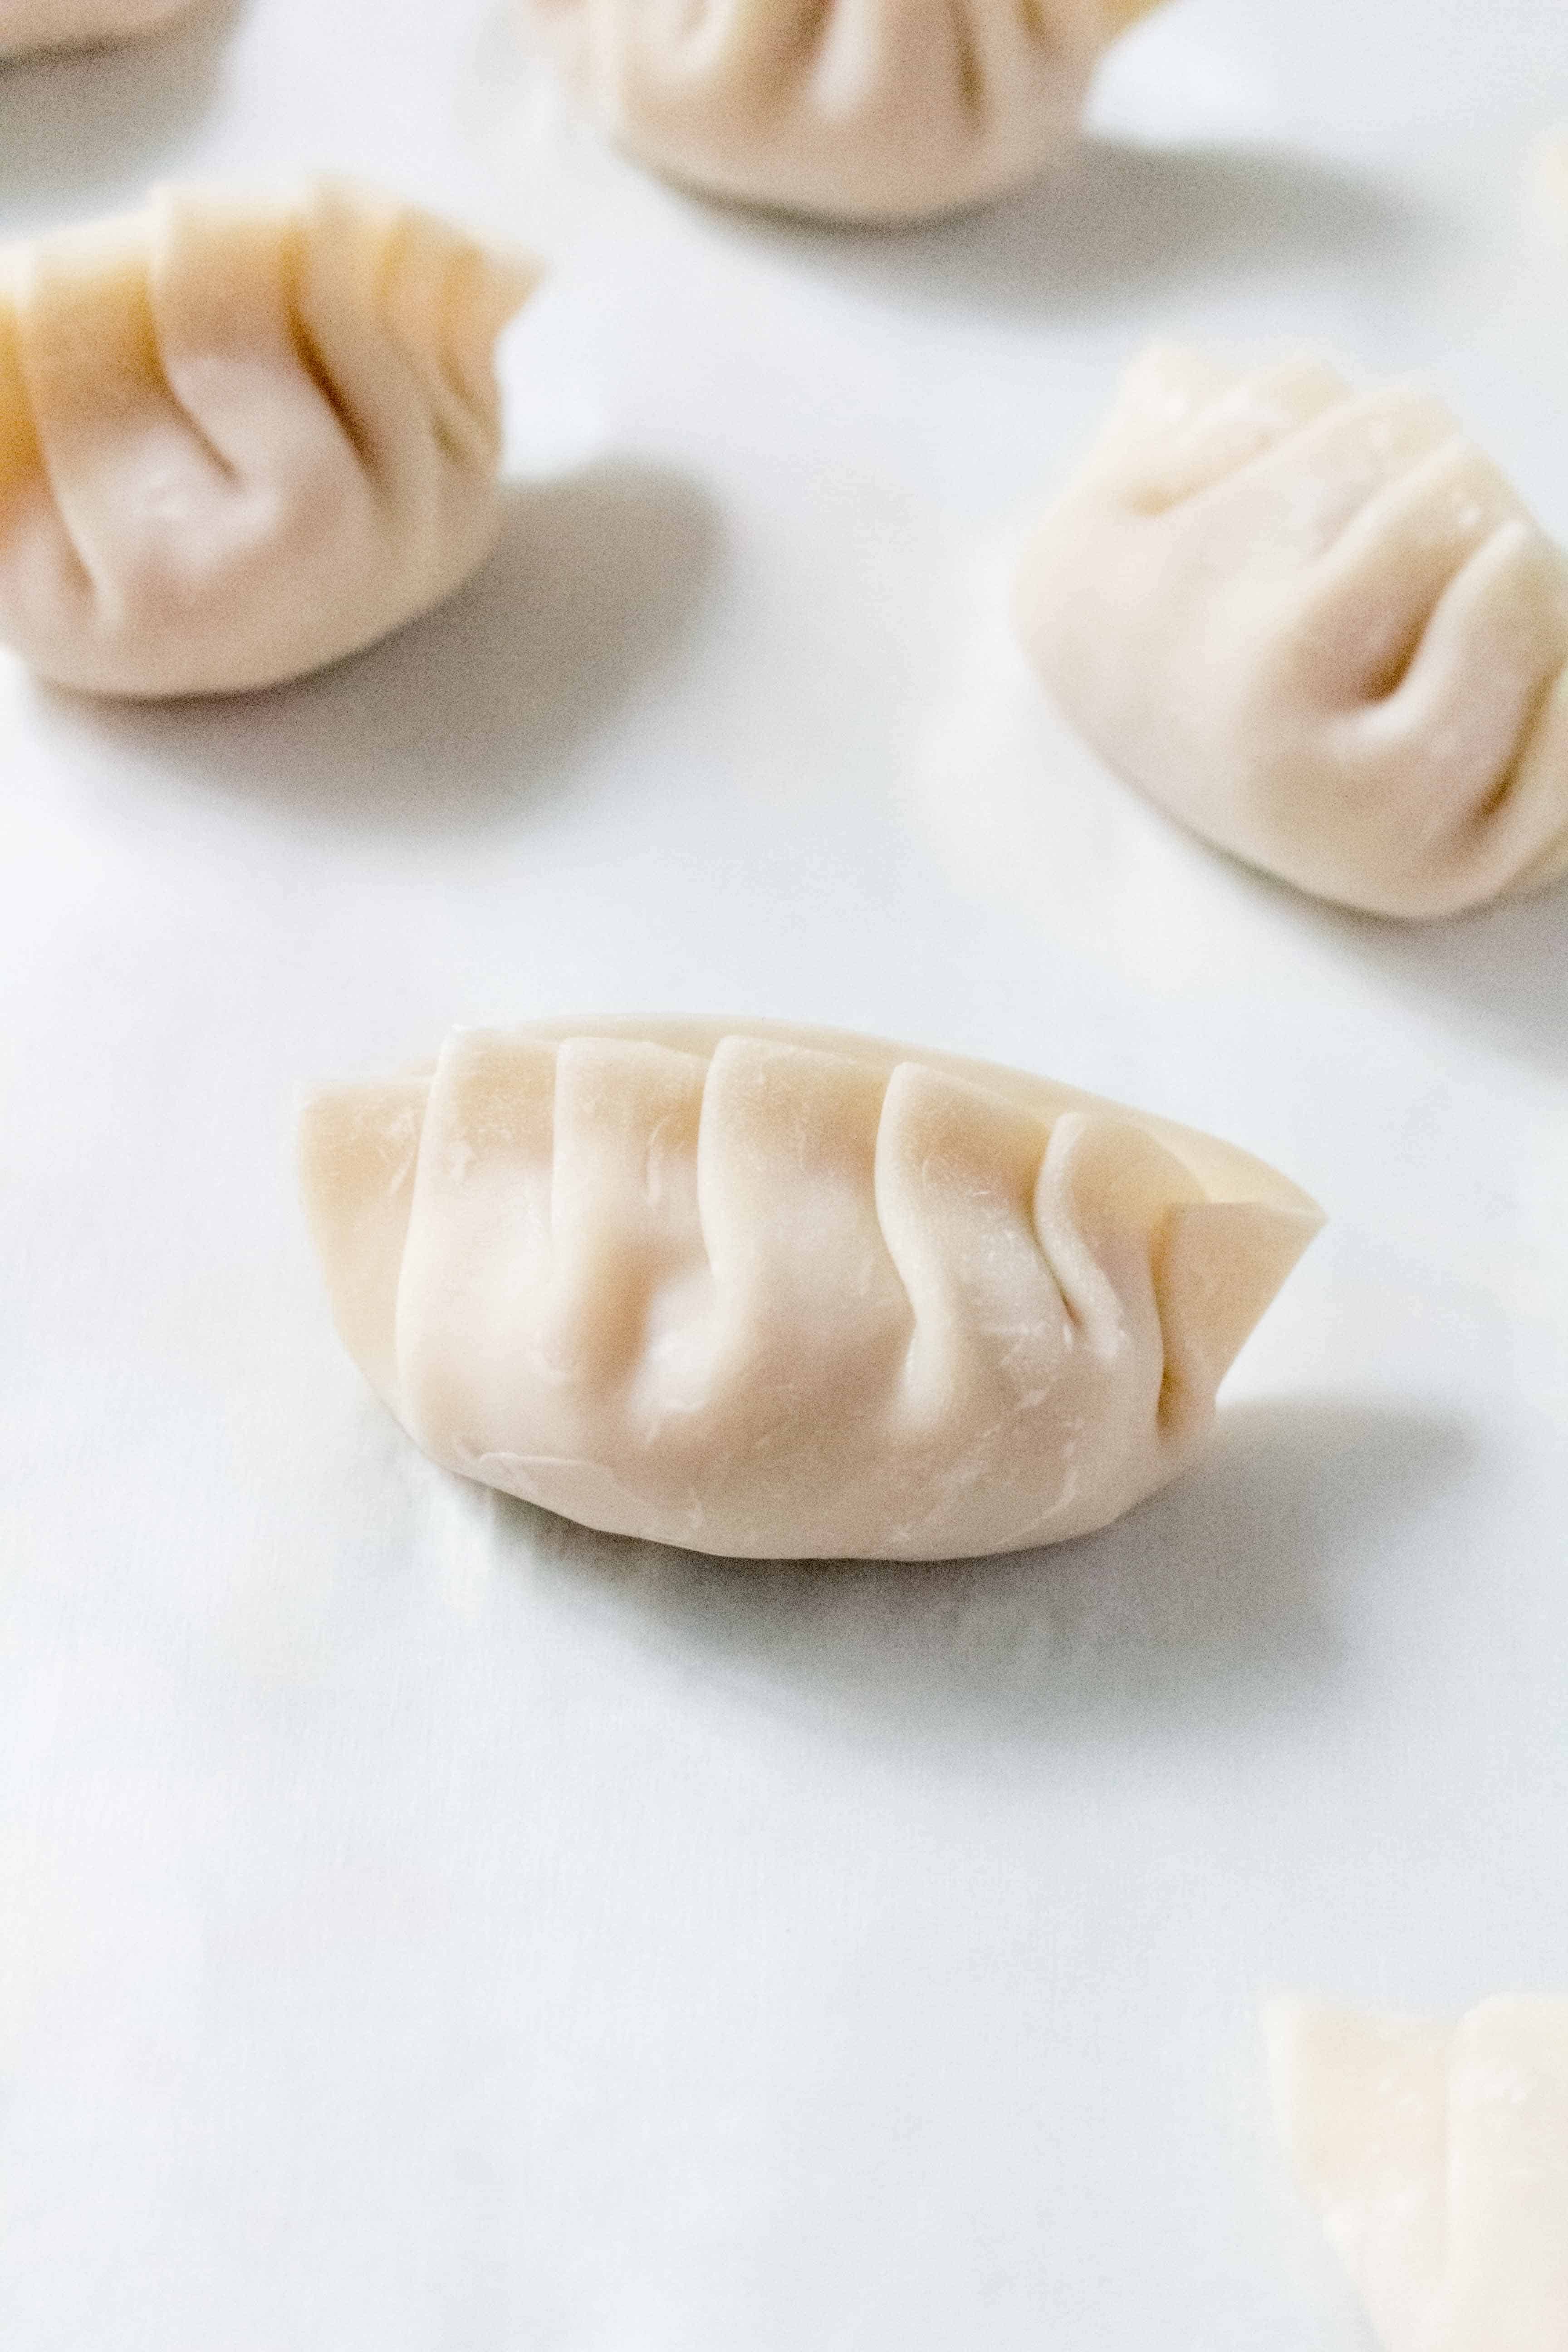 Filled with pork and garlic and have crispy golden bottoms, Pork Potstickers makes for the perfect meal or meal prep. These potstickers are freezer friendly so you can make always have some on hand!